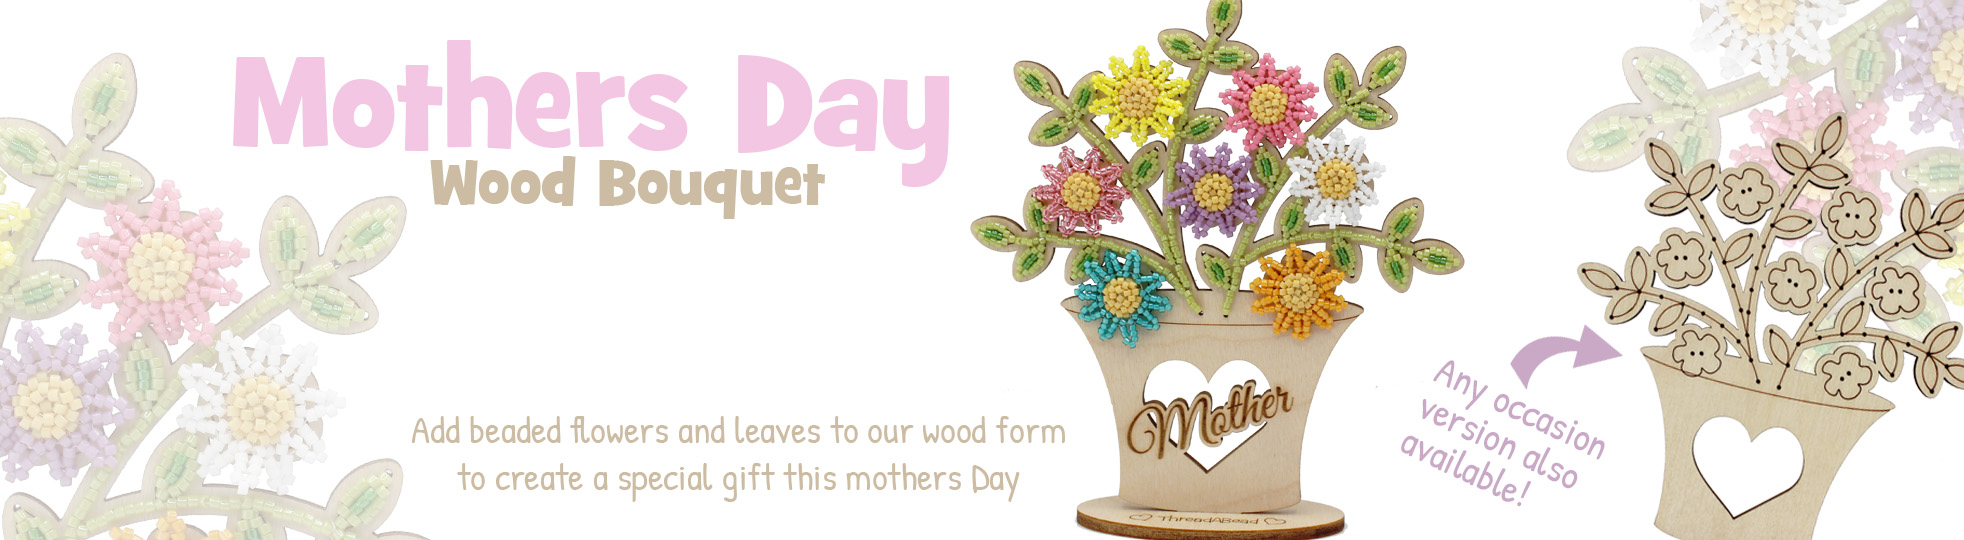 Mothers Day Wood Bouquet Bead PAttern